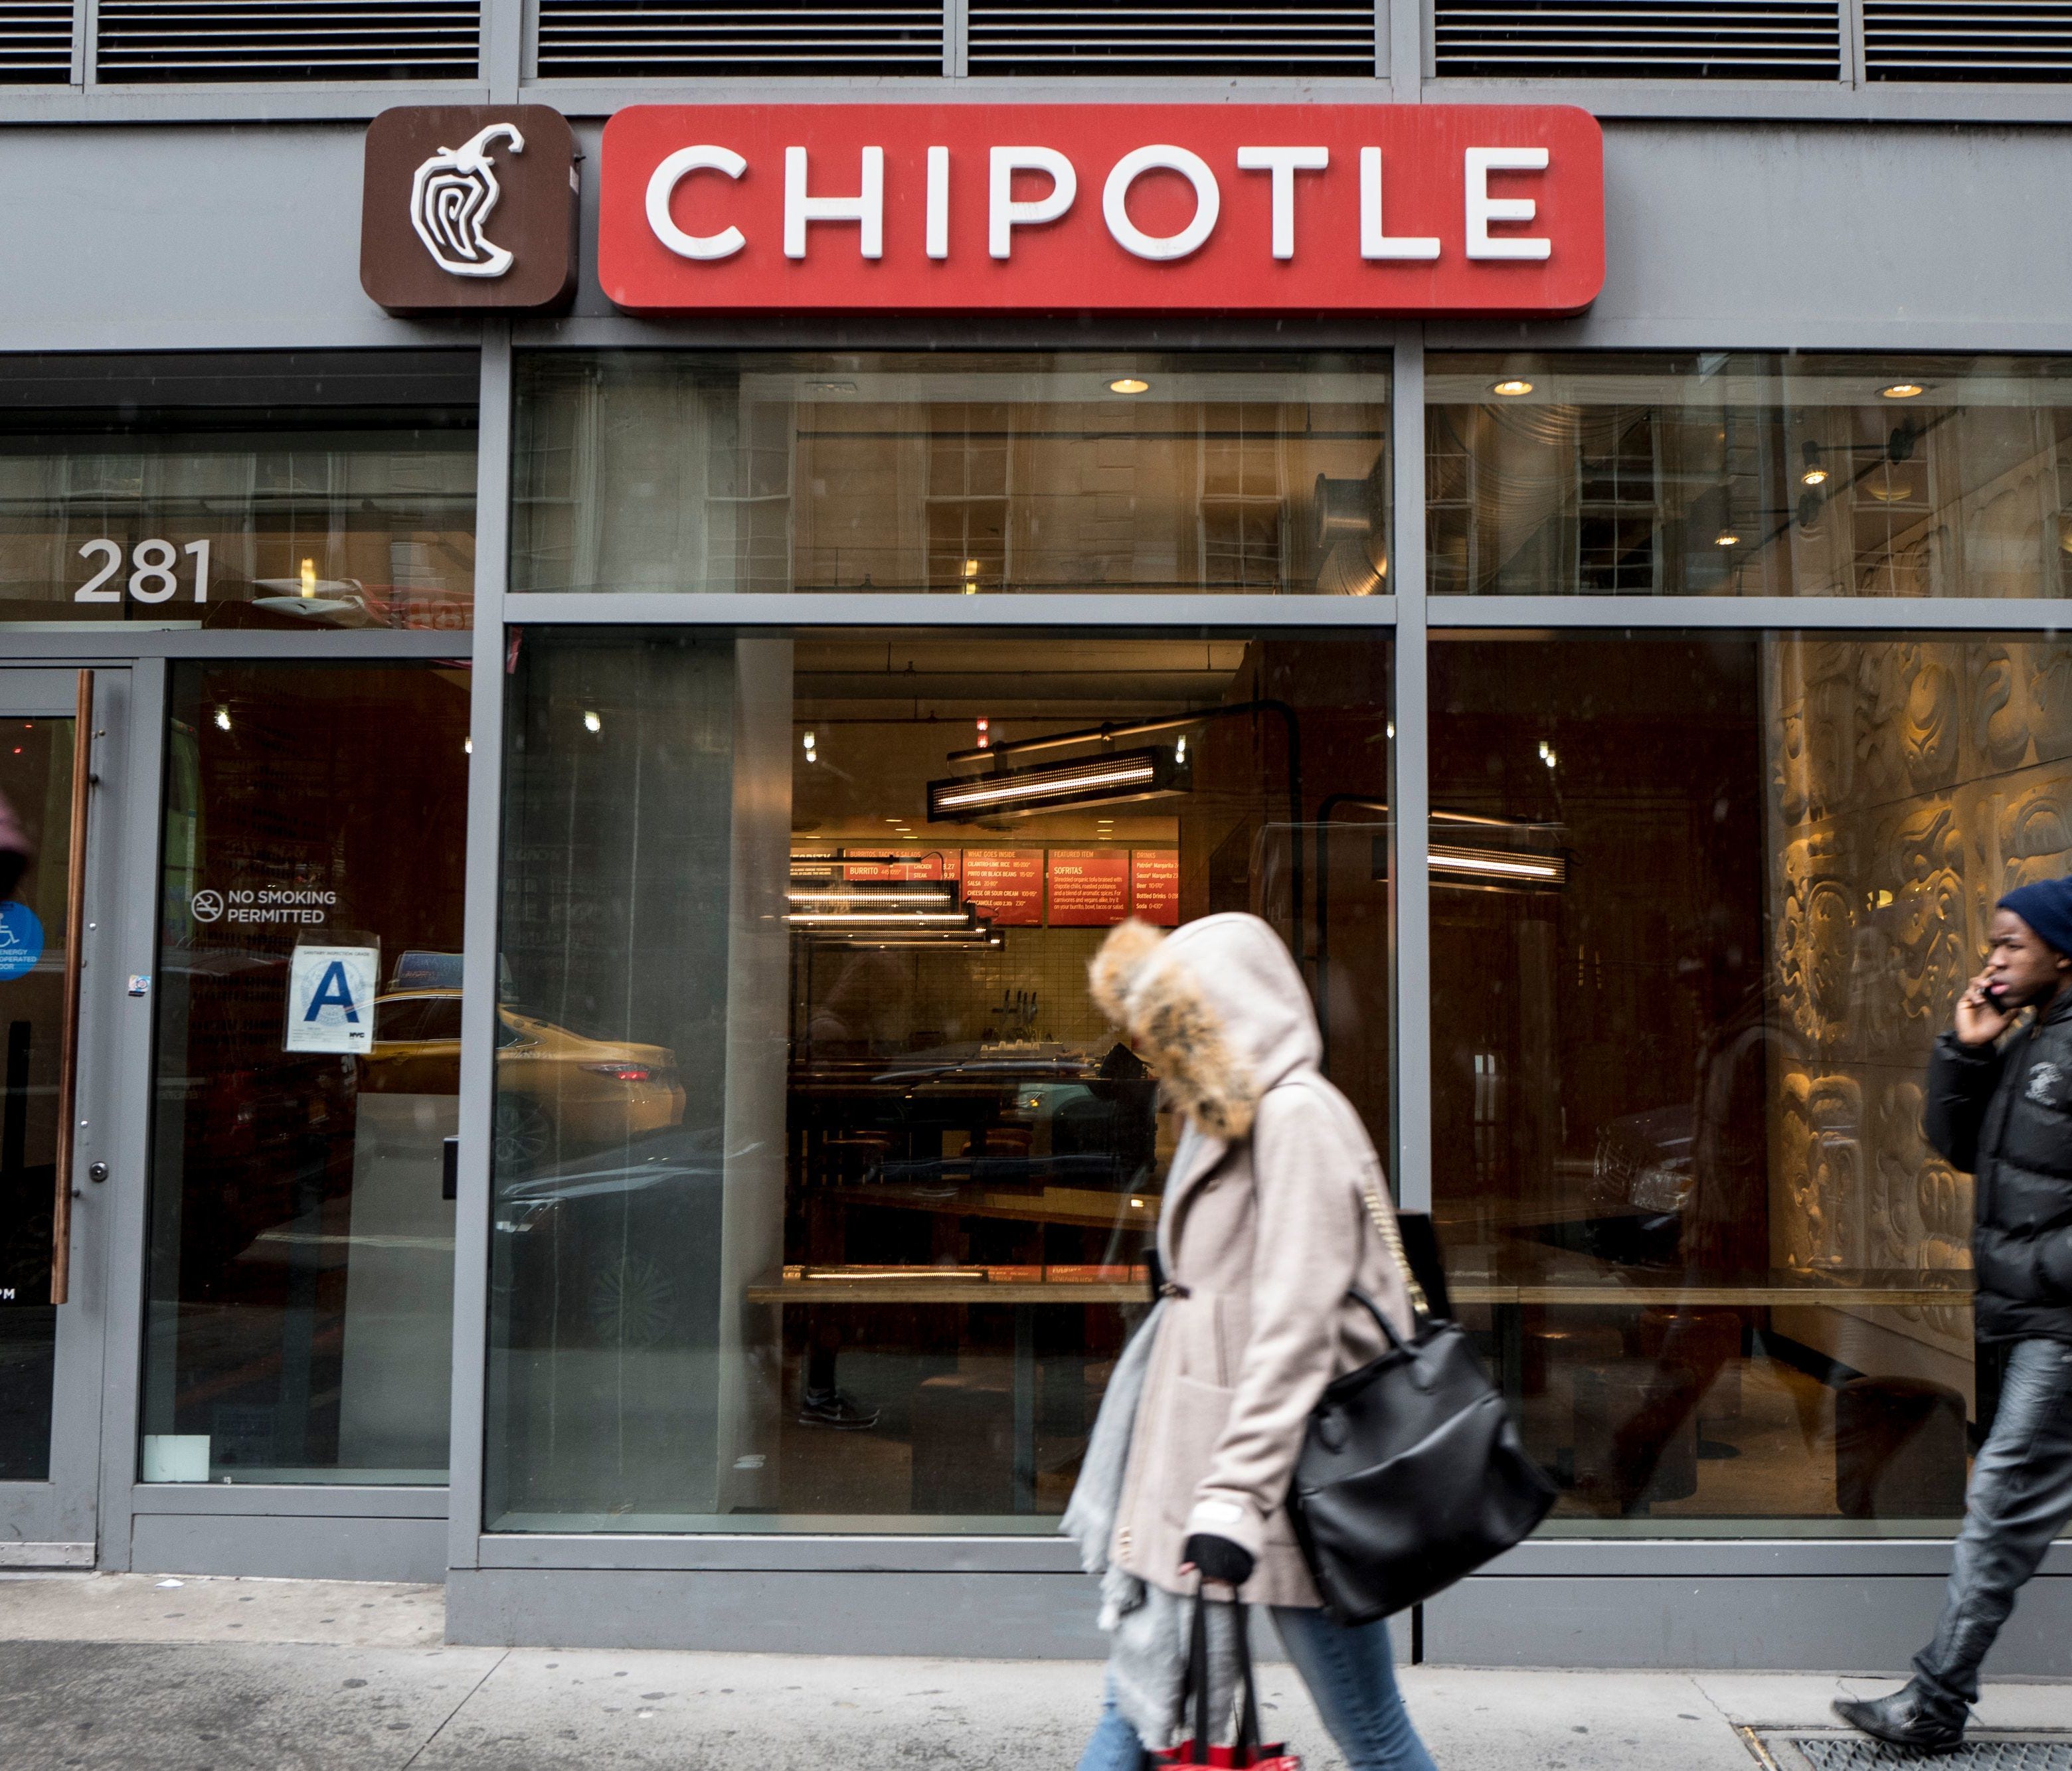 Chipotle Mexican Grill is facing several challenges in 2018.